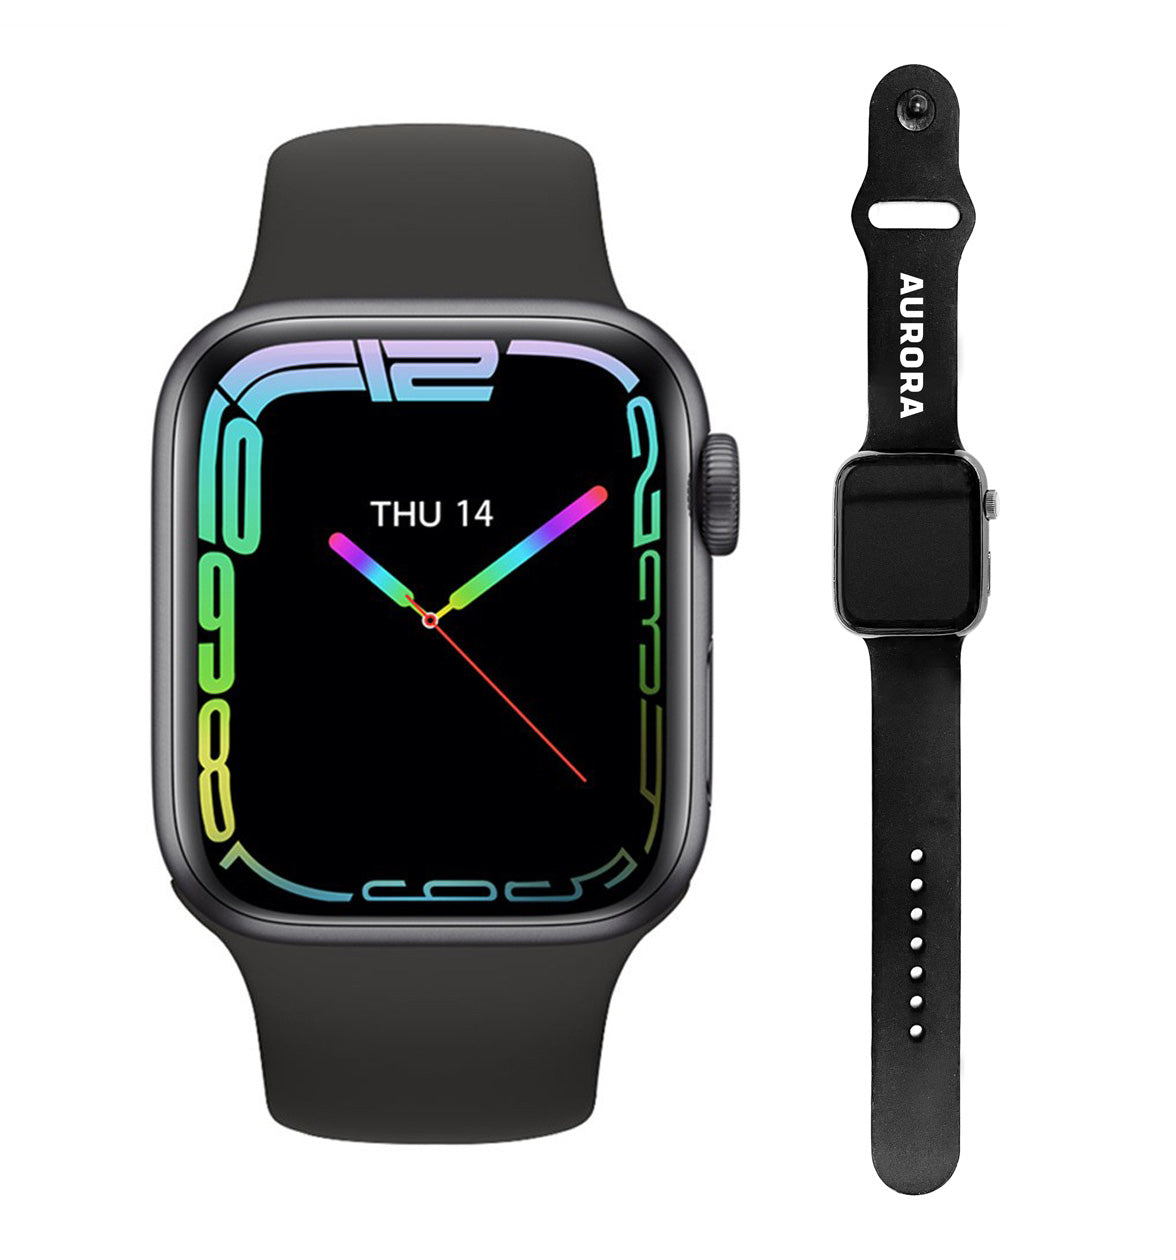 Collector Item #20: Limited-Edition Smart Watch